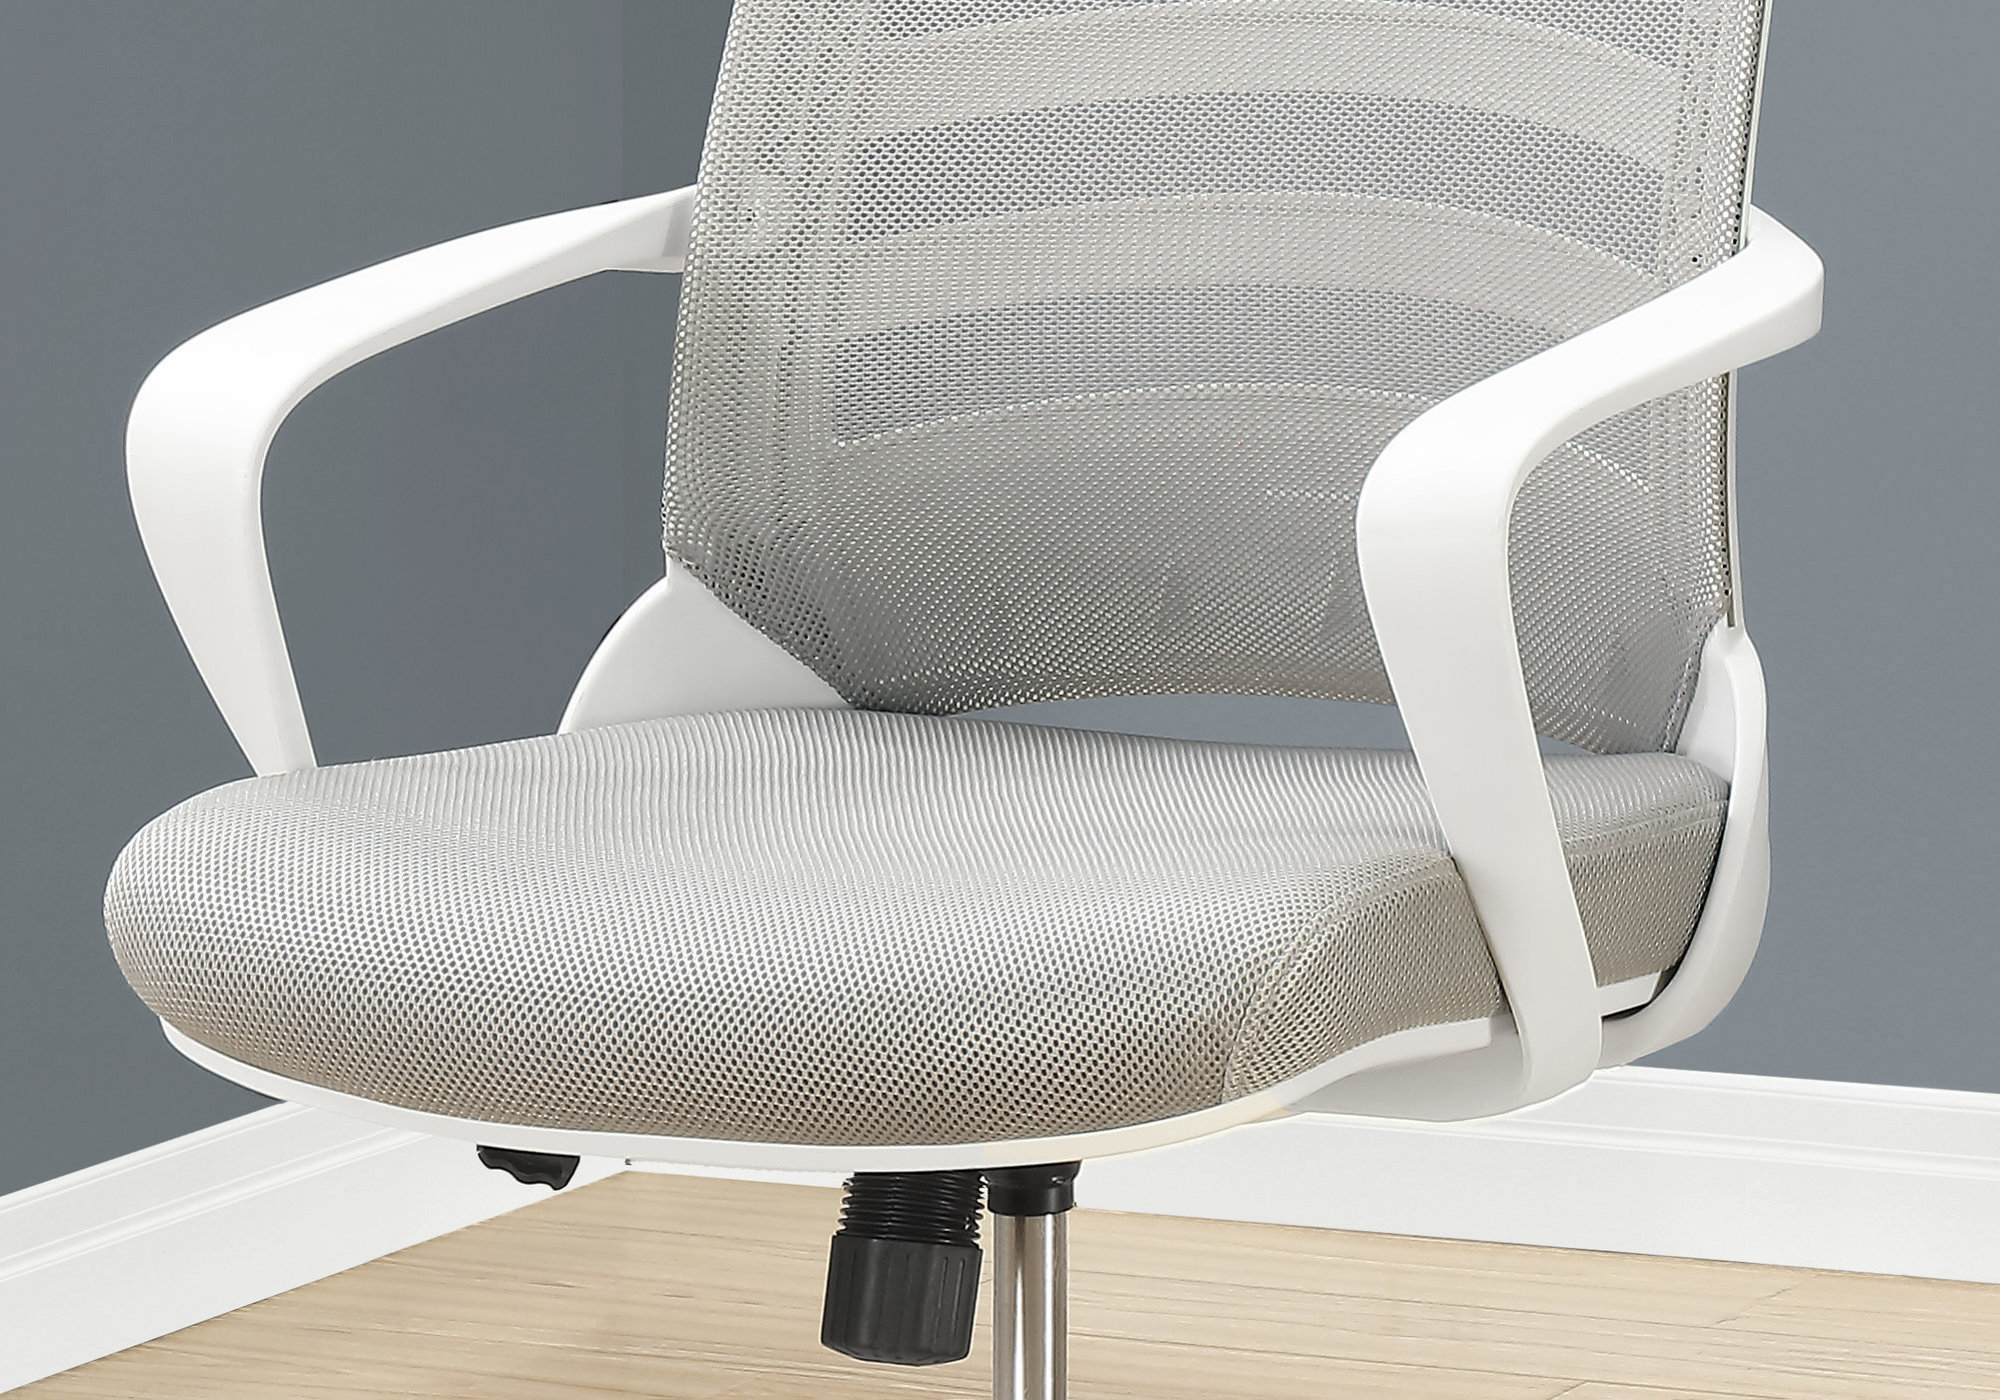 OFFICE CHAIR - WHITE / GREY MESH / MULTI POSITION